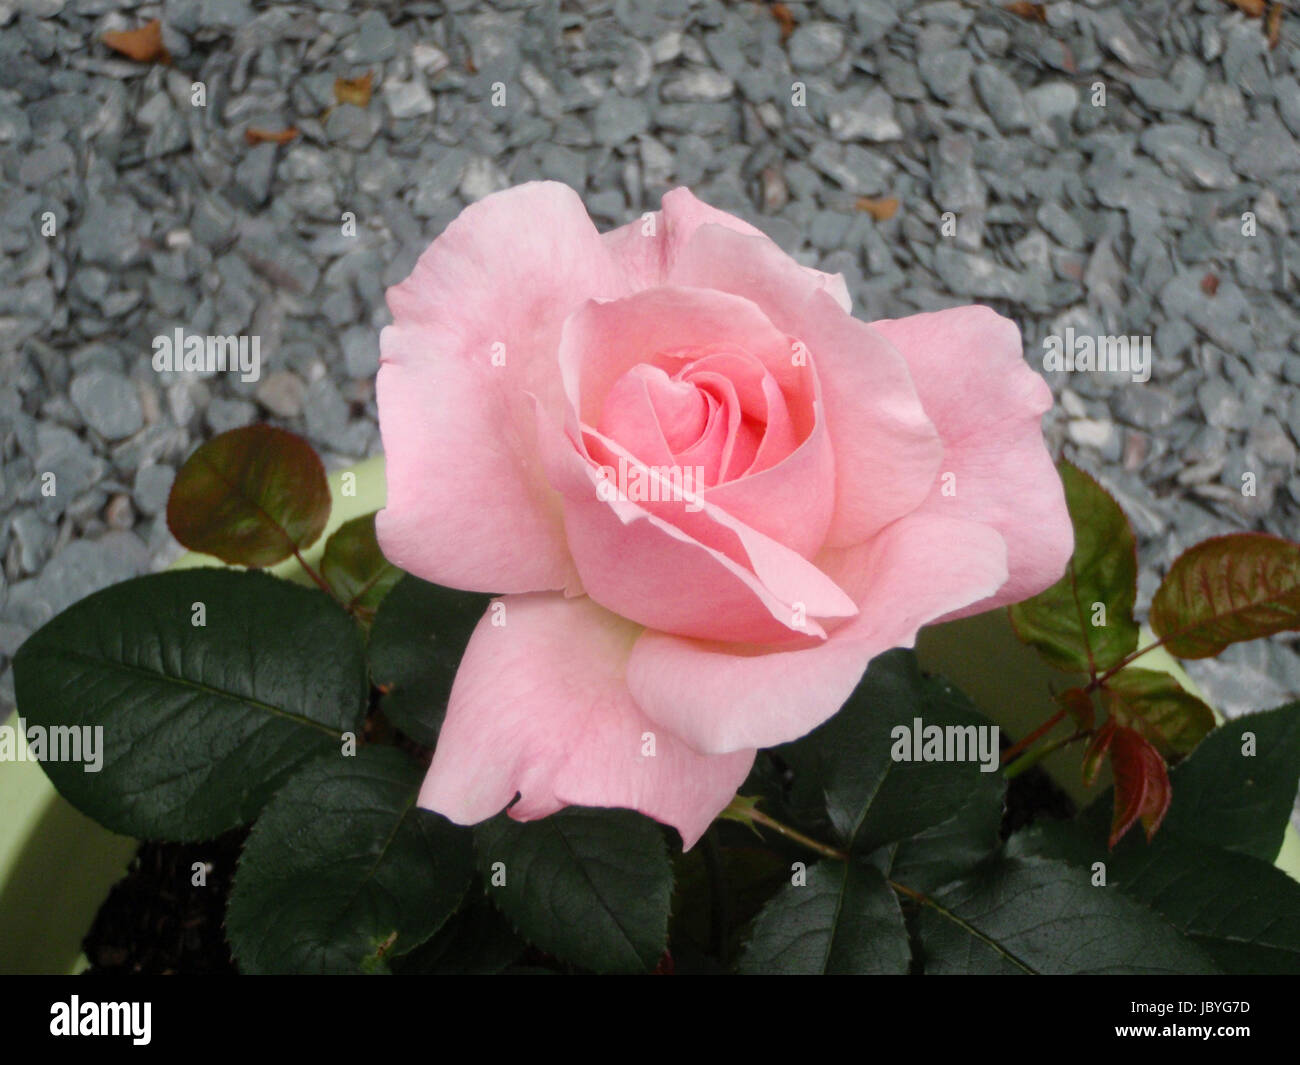 Delicate pale pink rose Stock Photo